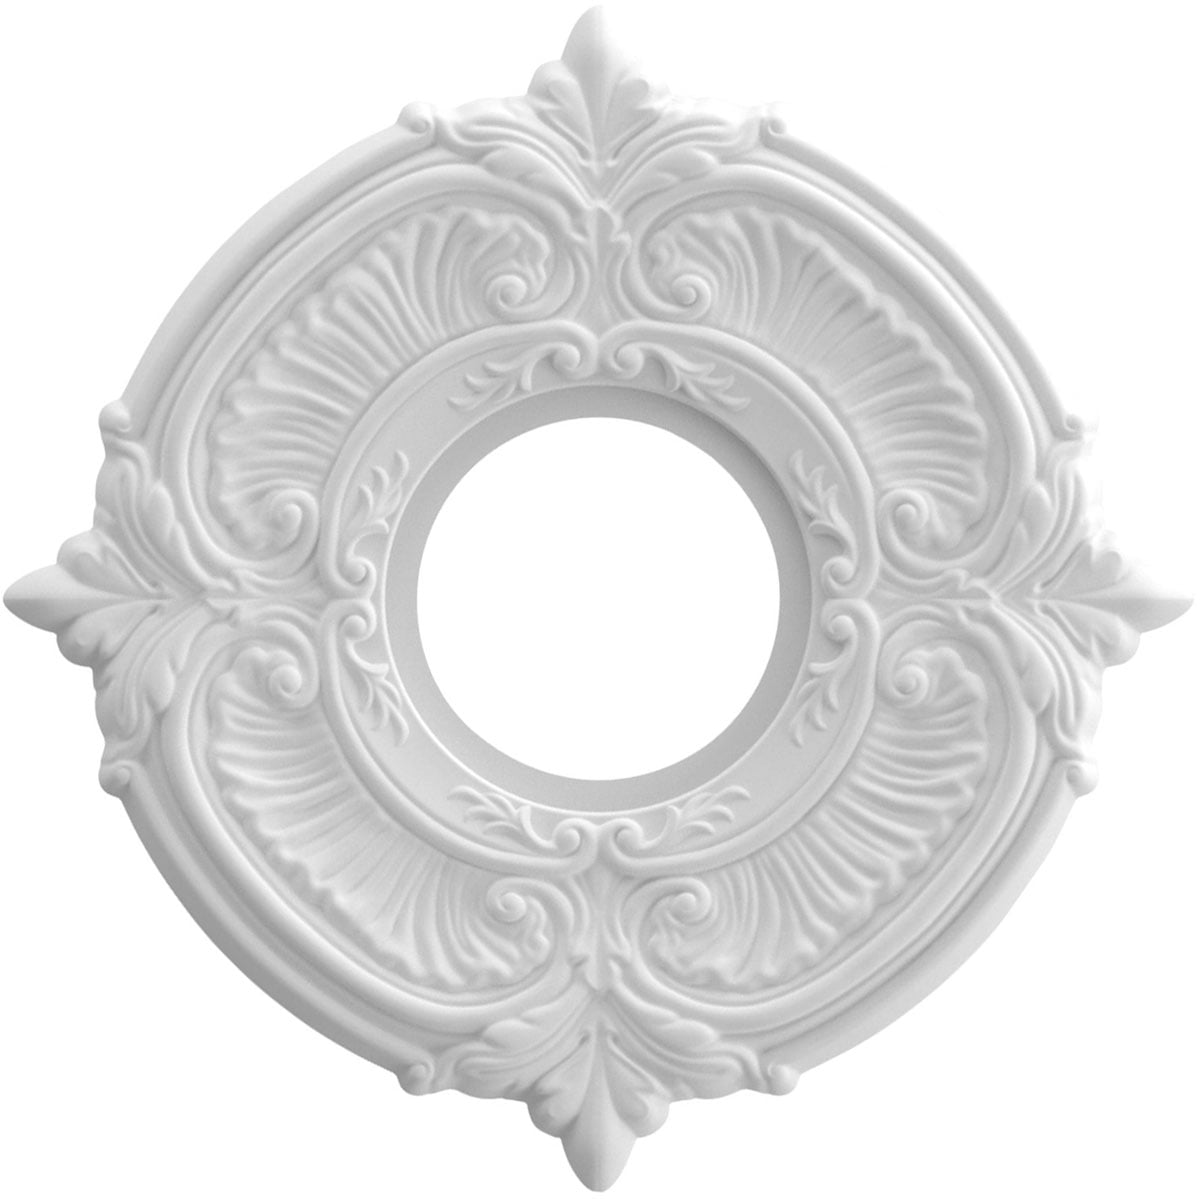 15 3/4"OD x 3 7/8"ID x 3/4"P Ceiling Medallion Fits Canopies up to 7" CM6050 